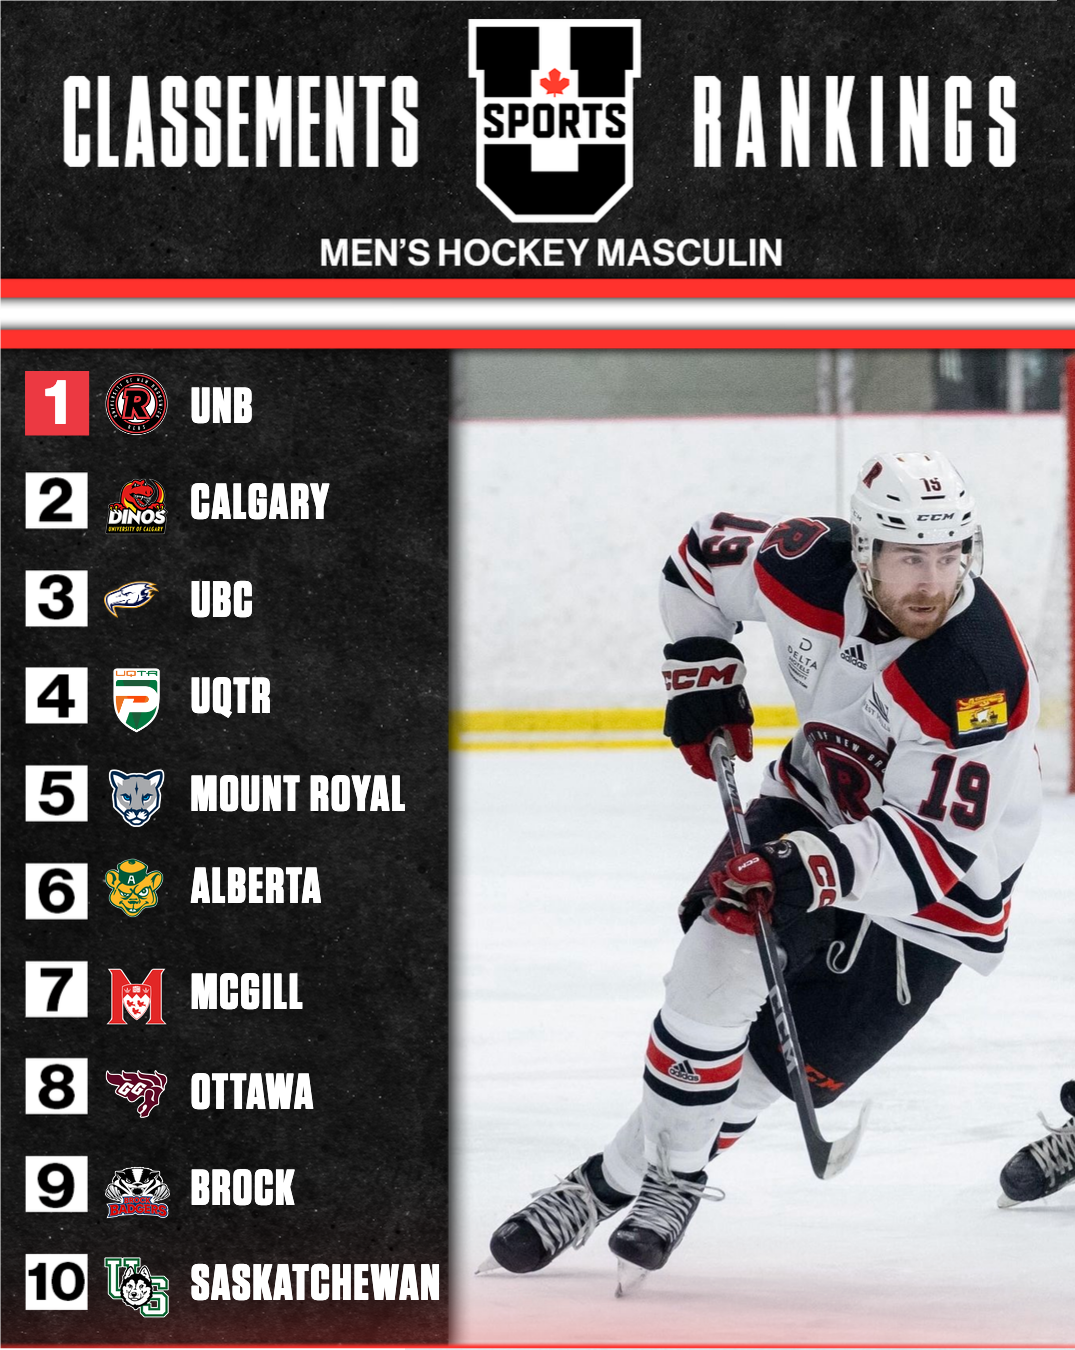 MHKY_TOP_10.png (1.57 MB)